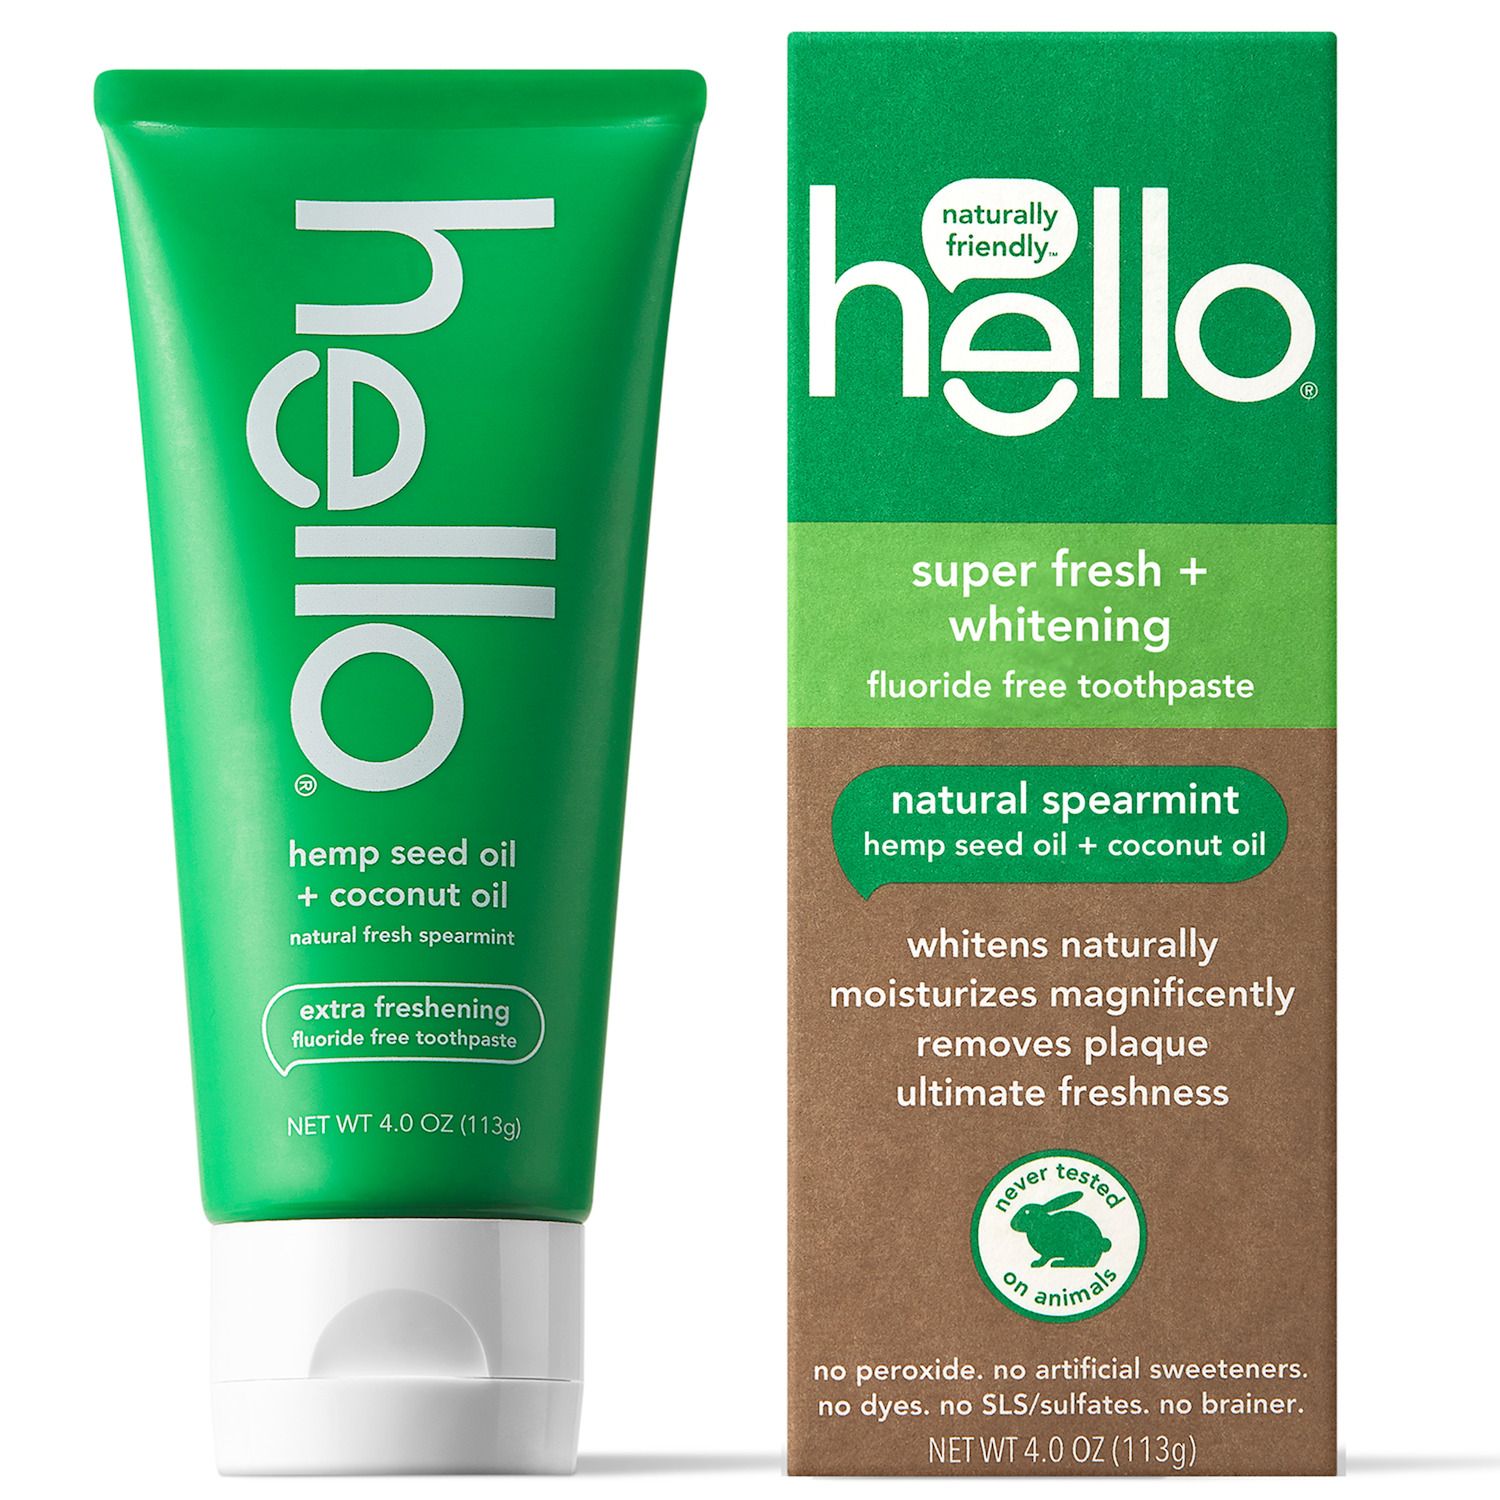 Image for hello Super Fresh + Whitening Fluoride Free Toothpaste at Kohl's.